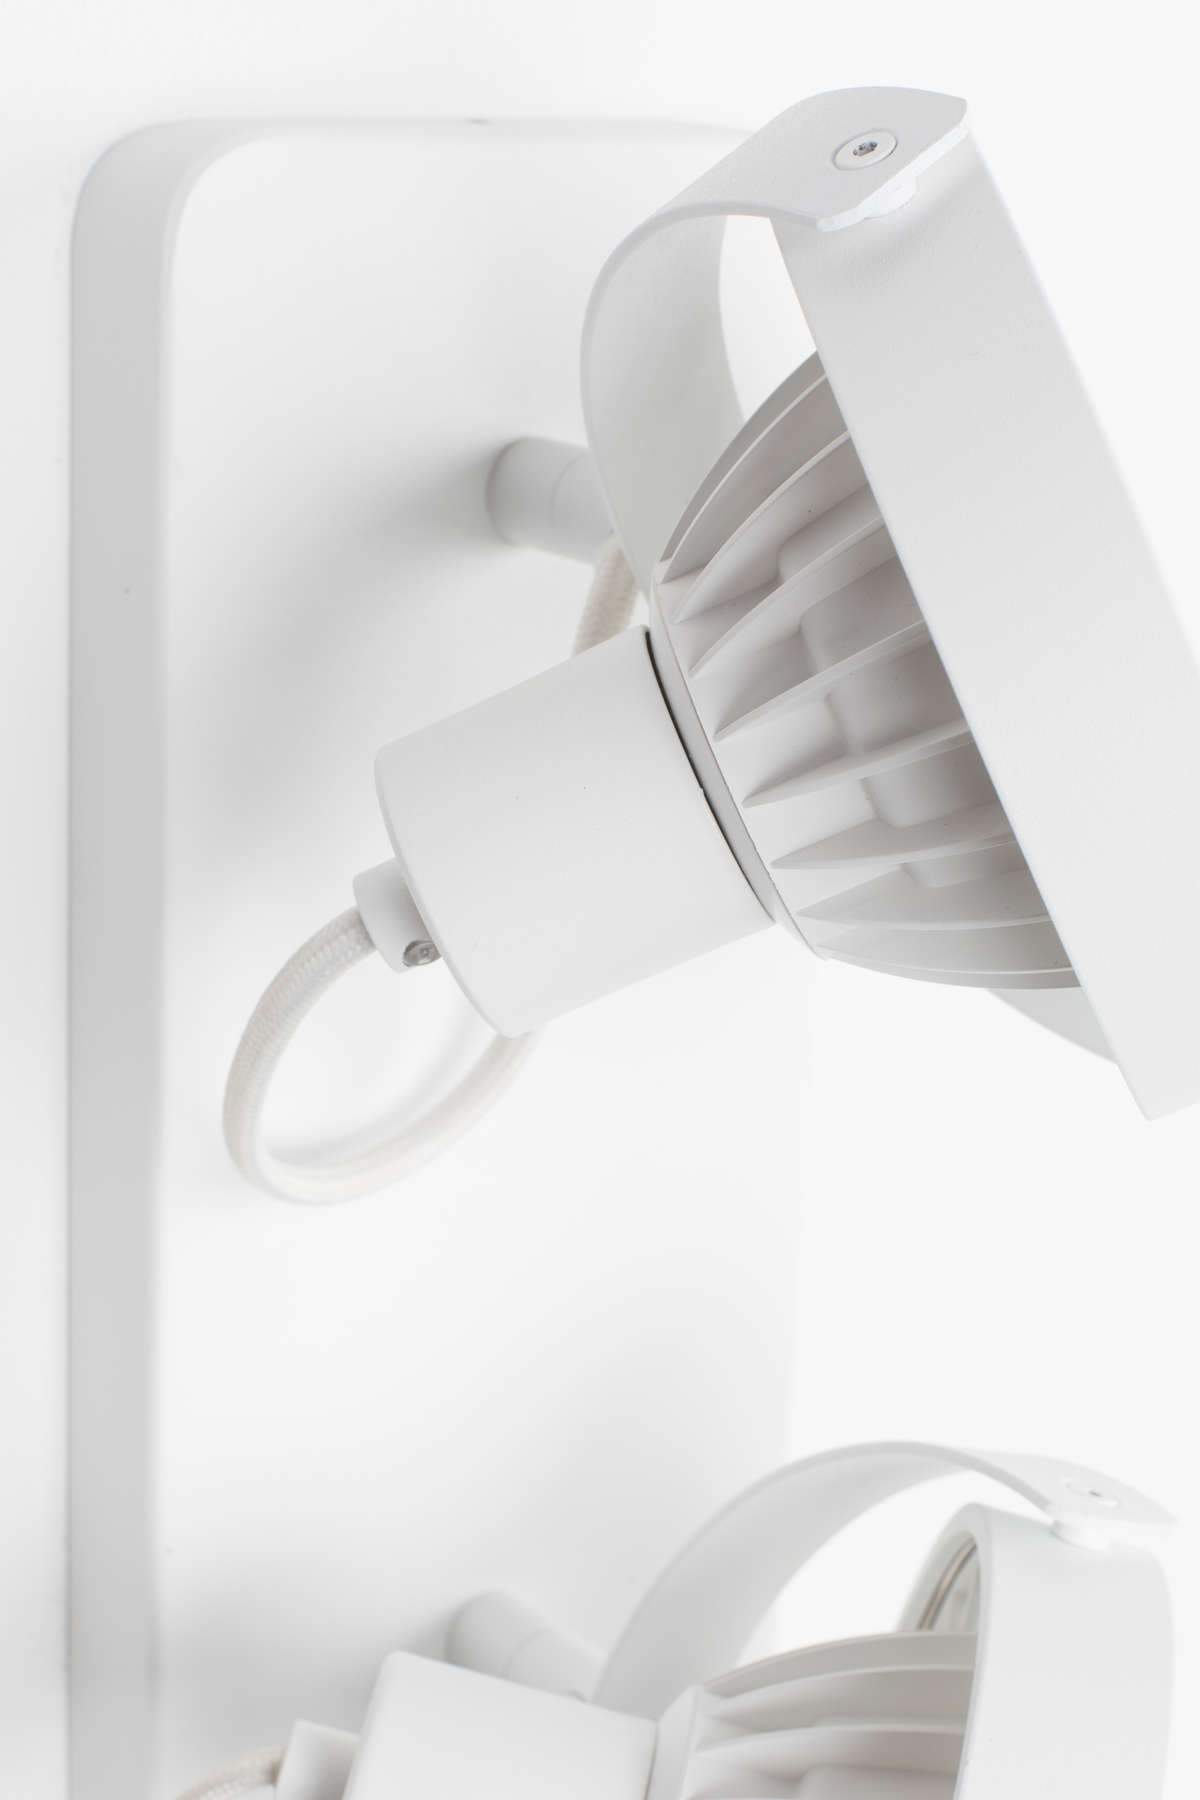 DICE-2 DTW point lamp white, Zuiver, Eye on Design